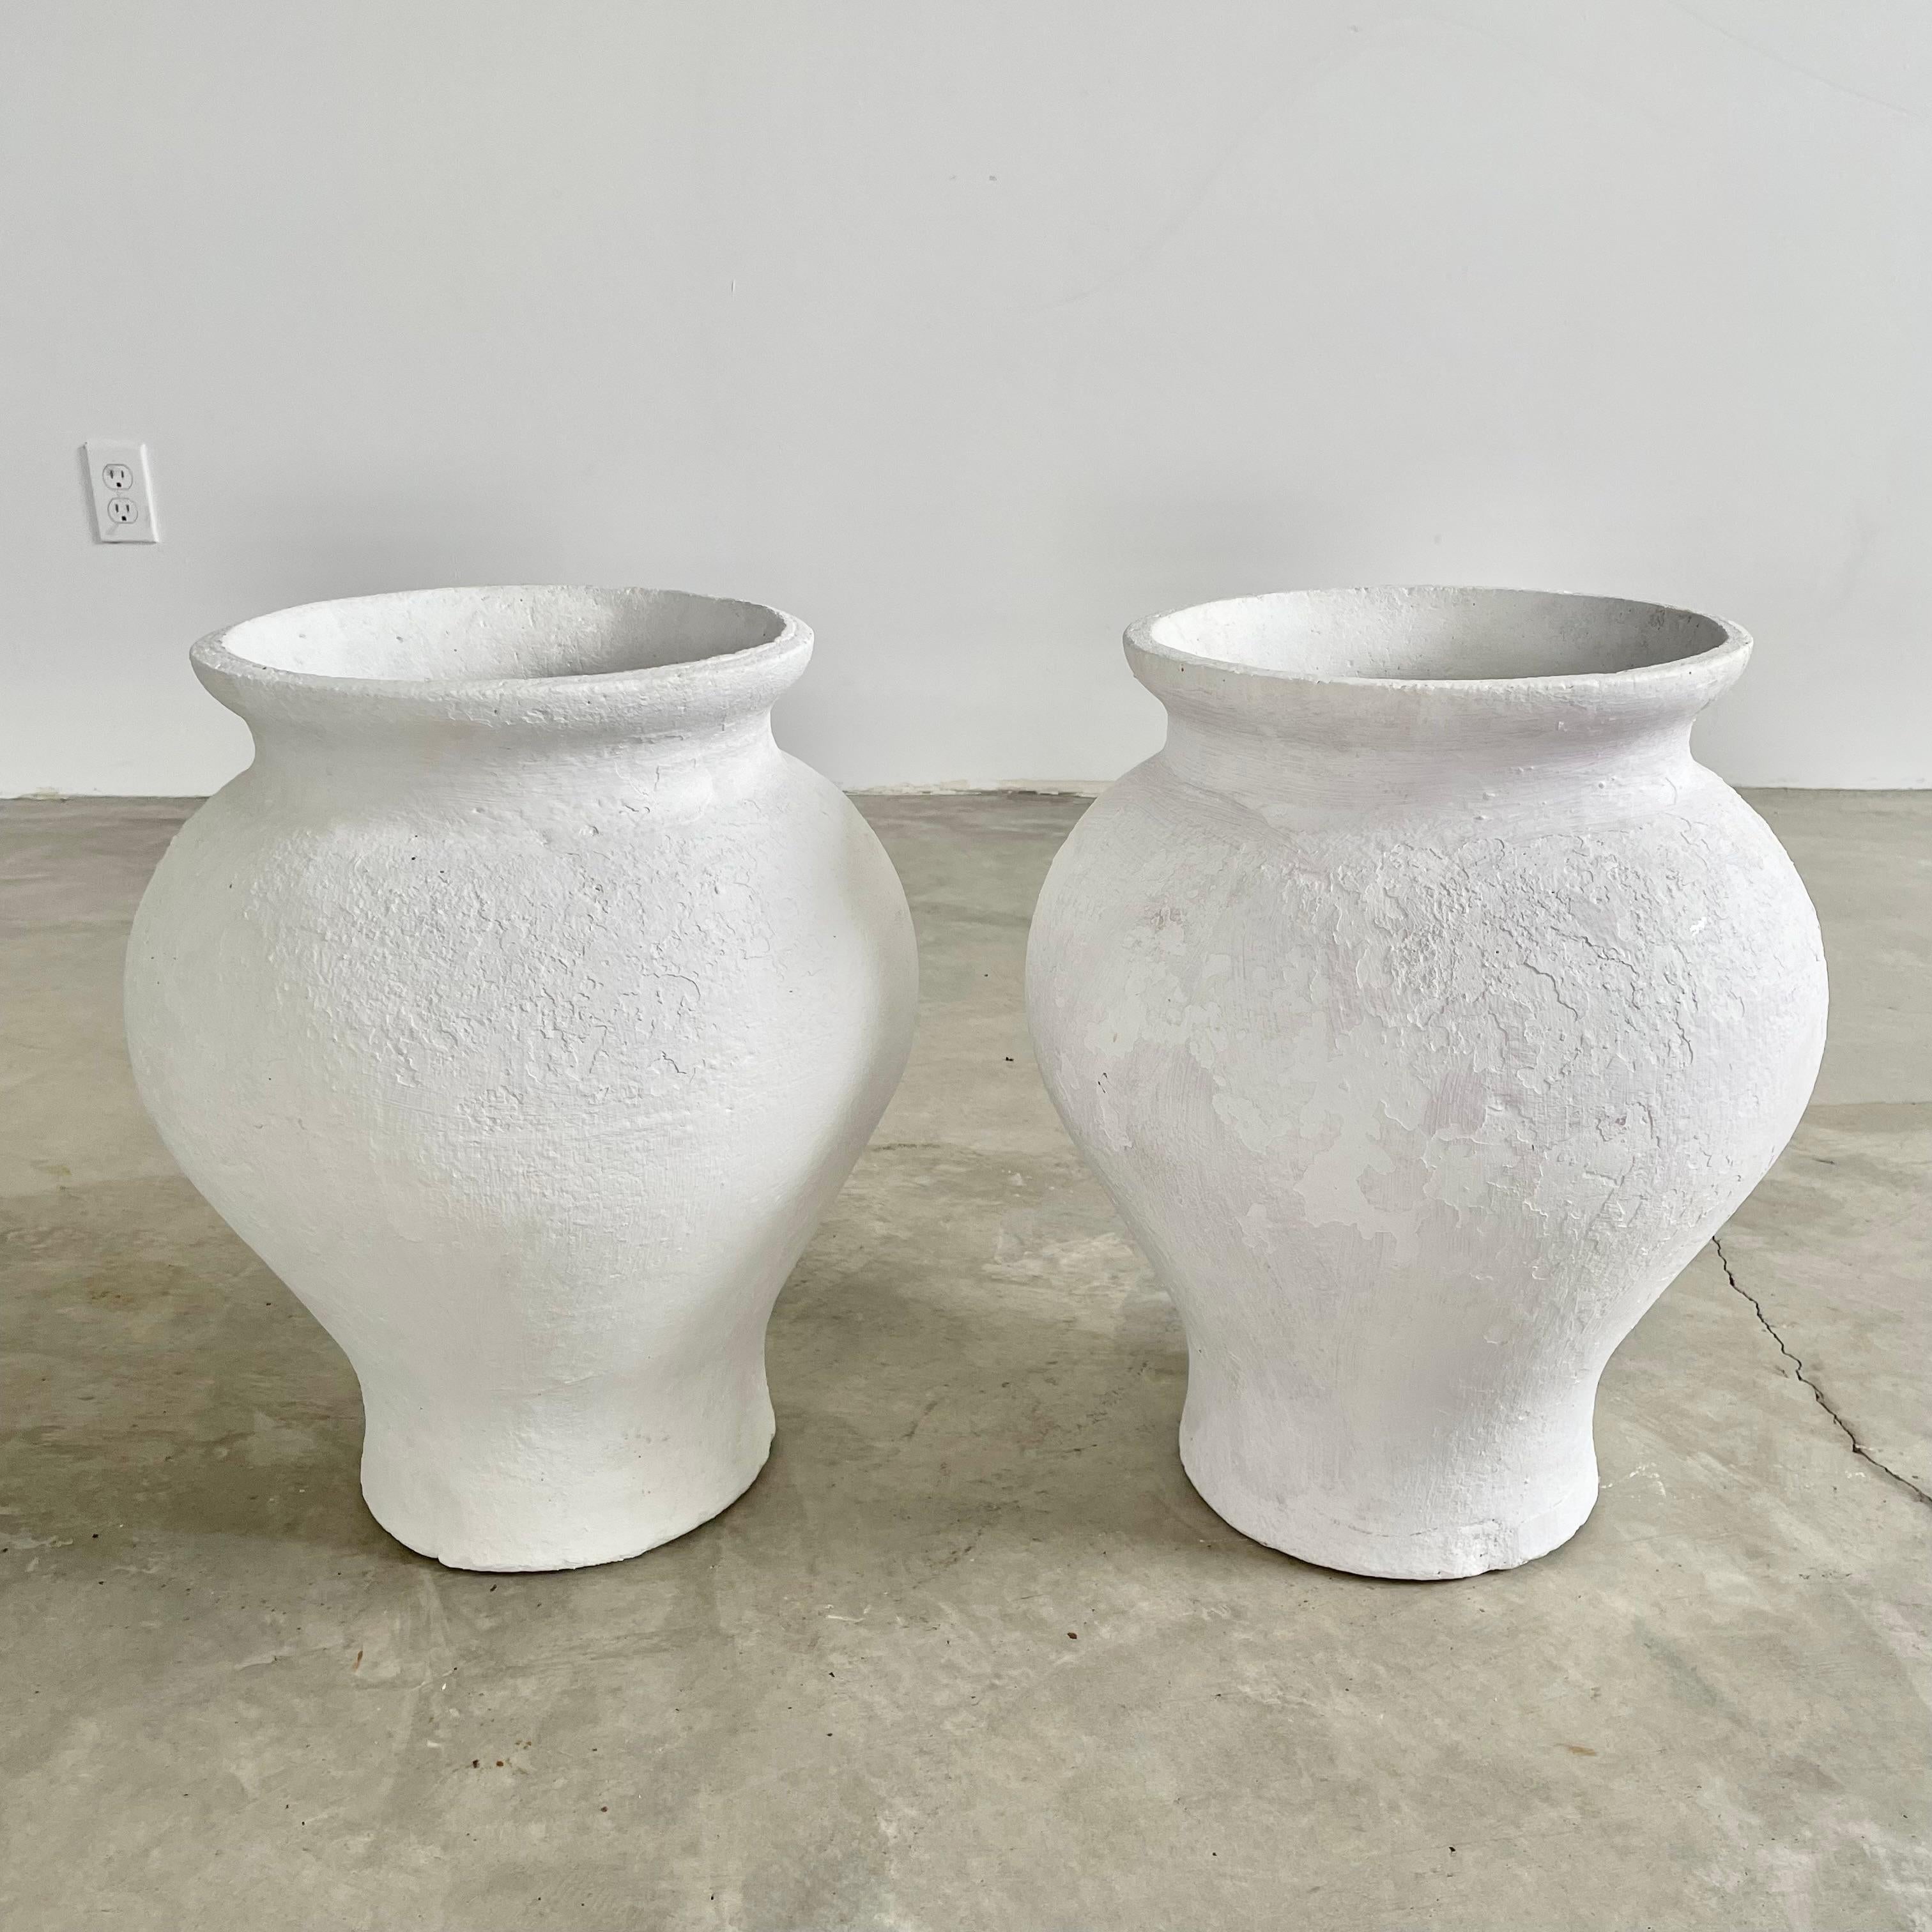 Beautiful concrete vases by Willy Guhl. Thick walls with years of patina both hand painted in a matte white paint. Delicate and classic lines that start with a thin tapered base and rise to a billowed out body. The vase again tapers in at the neck